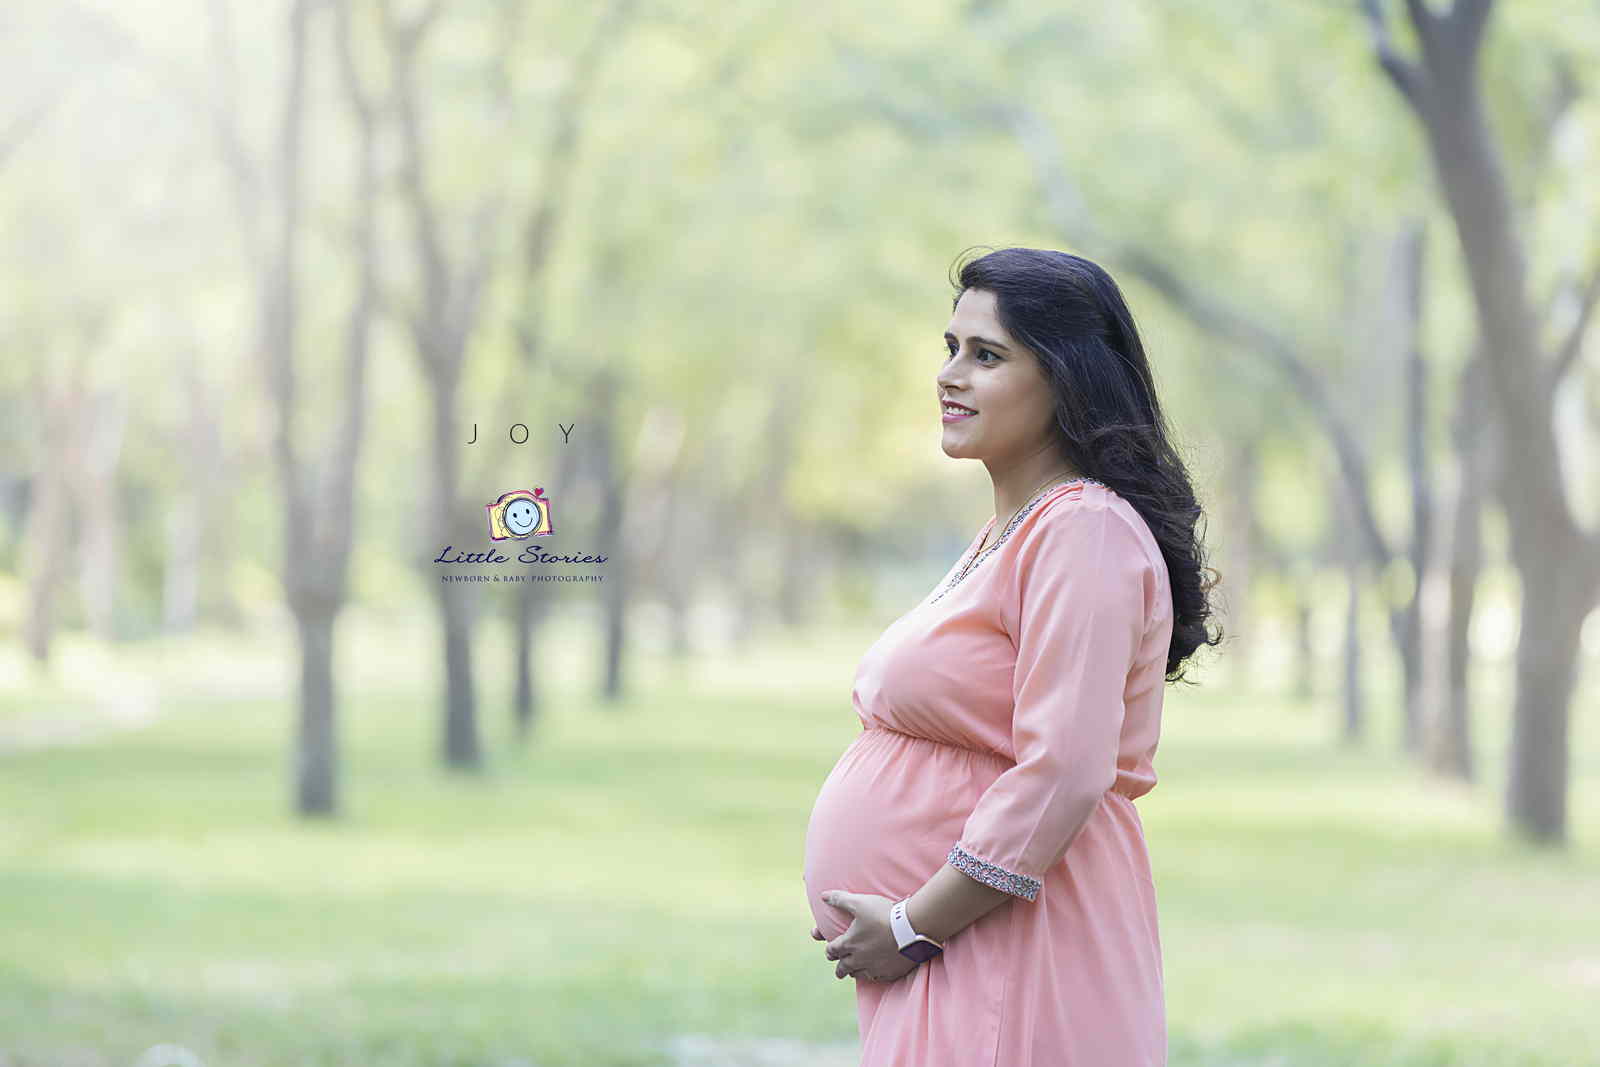 Traditional Baby Shower Photoshoots: A Guide to Preserving Precious Moments